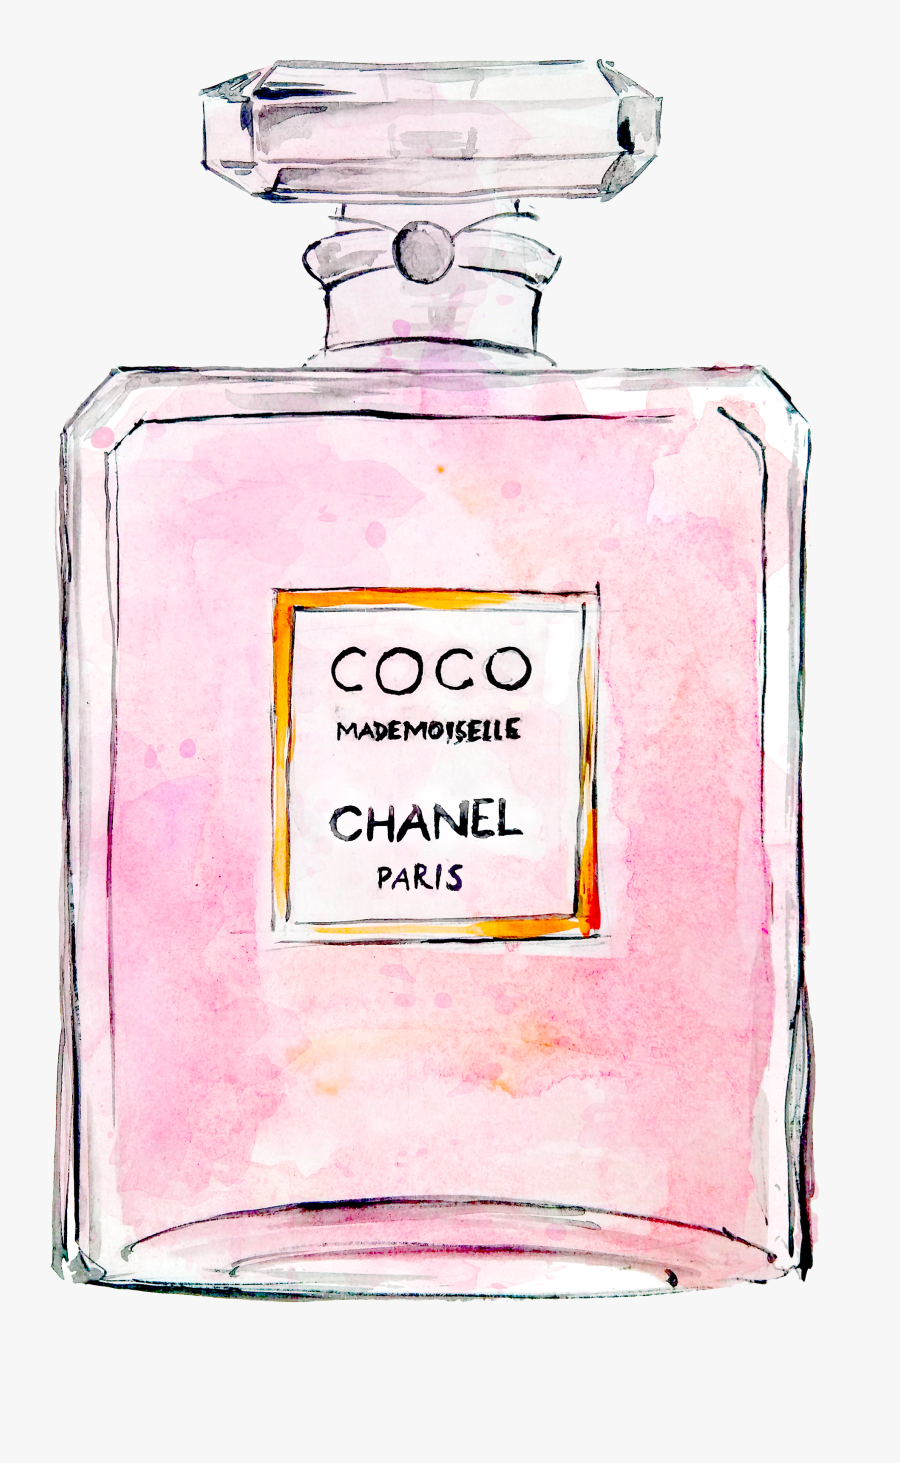 Chanel Drawing Coco Mademoiselle Image Of Coco Chanel, Free Transparent Clipart